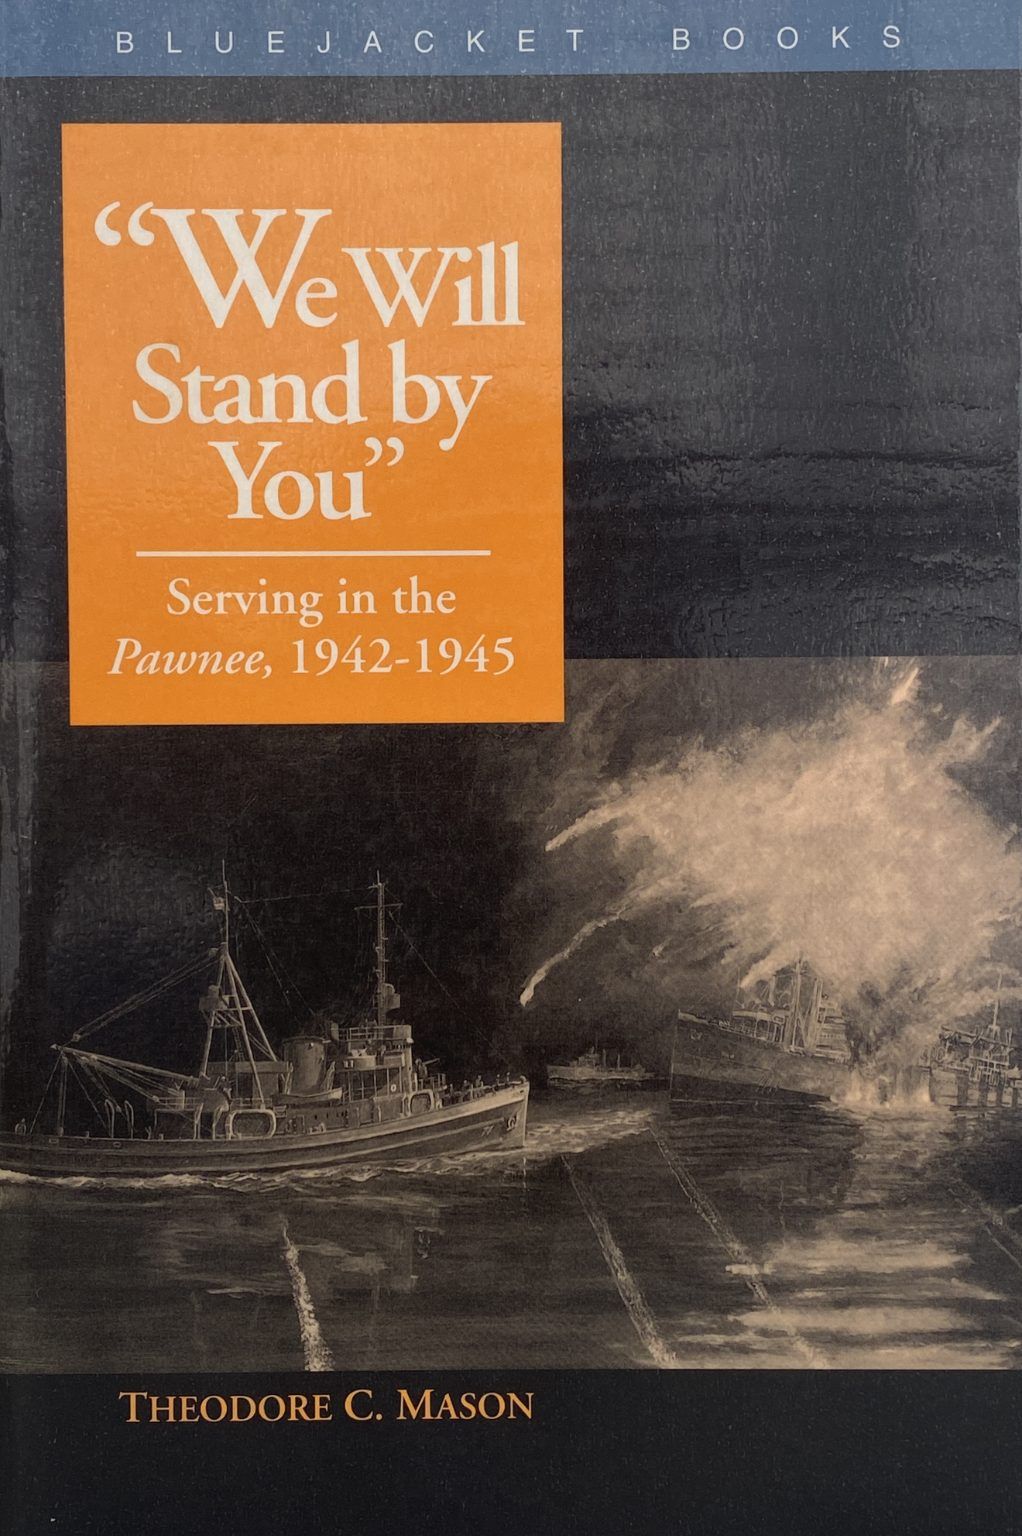 WE WILL STAND BY YOU: Serving in the Pawnee 1942-1945